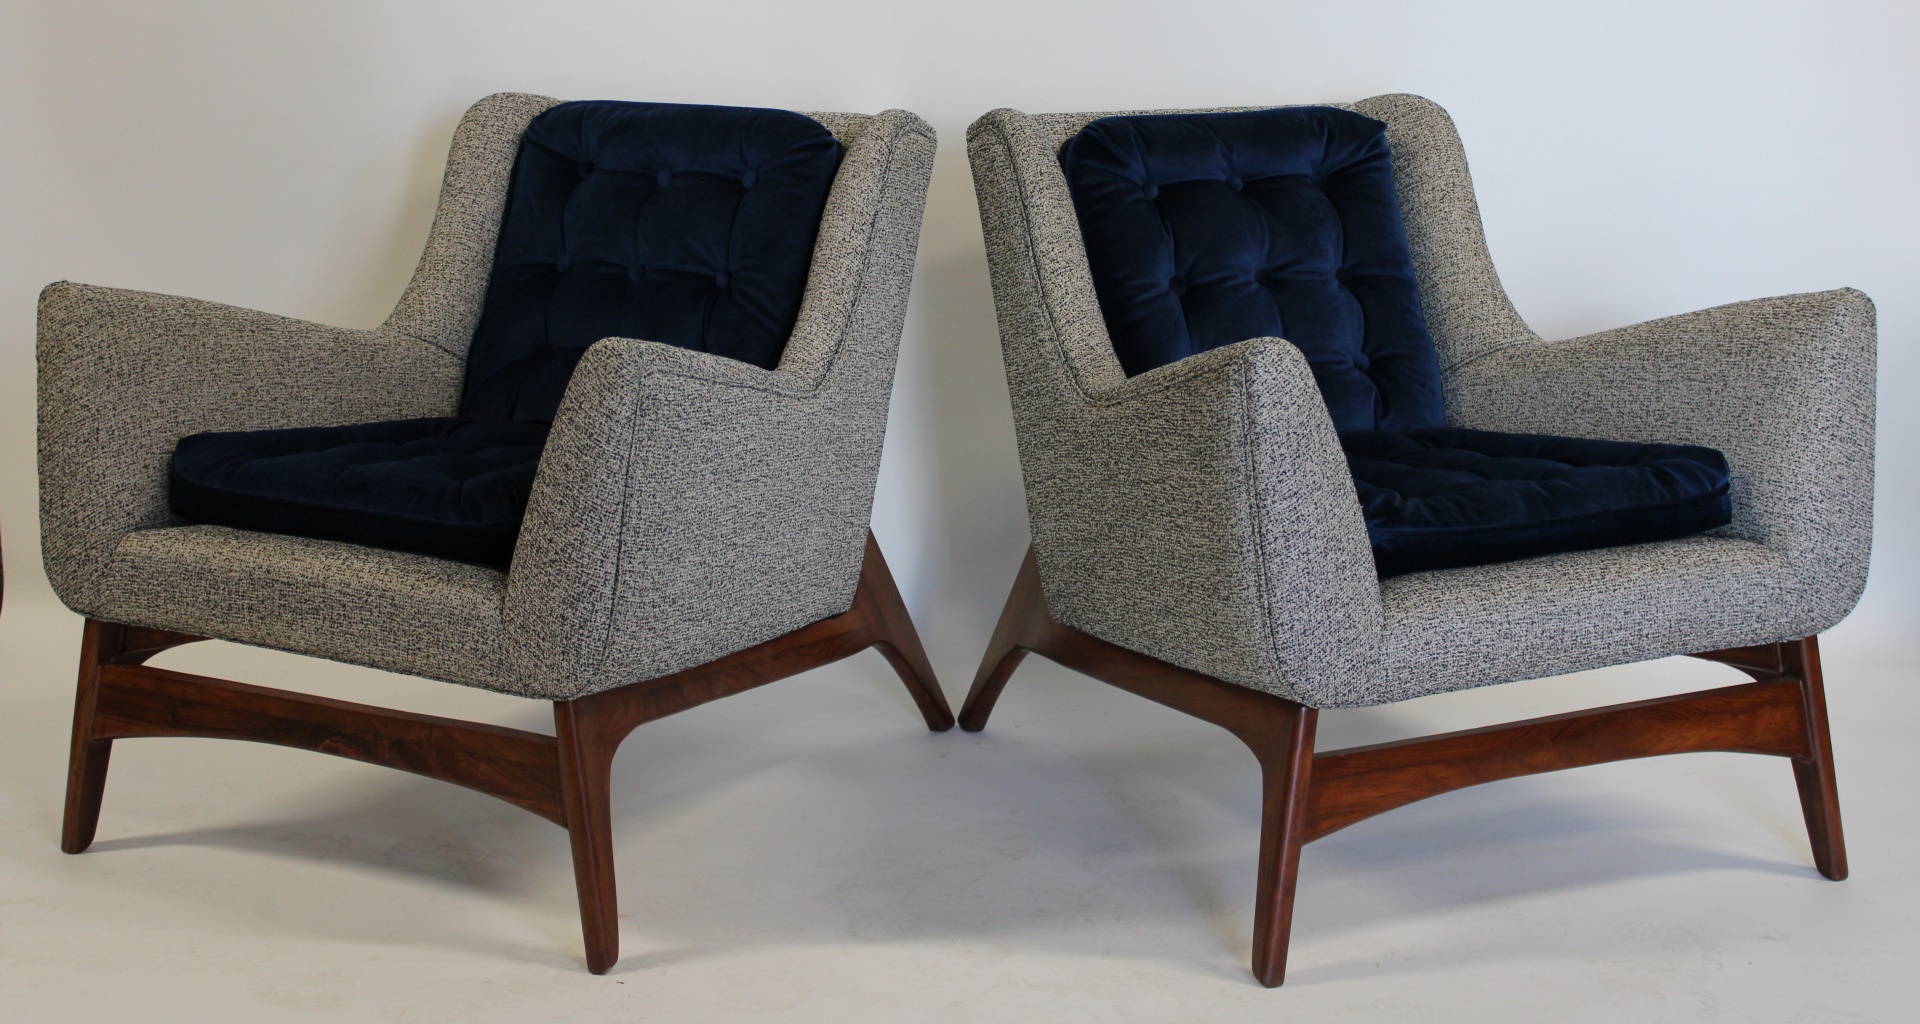 A MIDCENTURY STYLE PAIR OF UPHOLSTERED